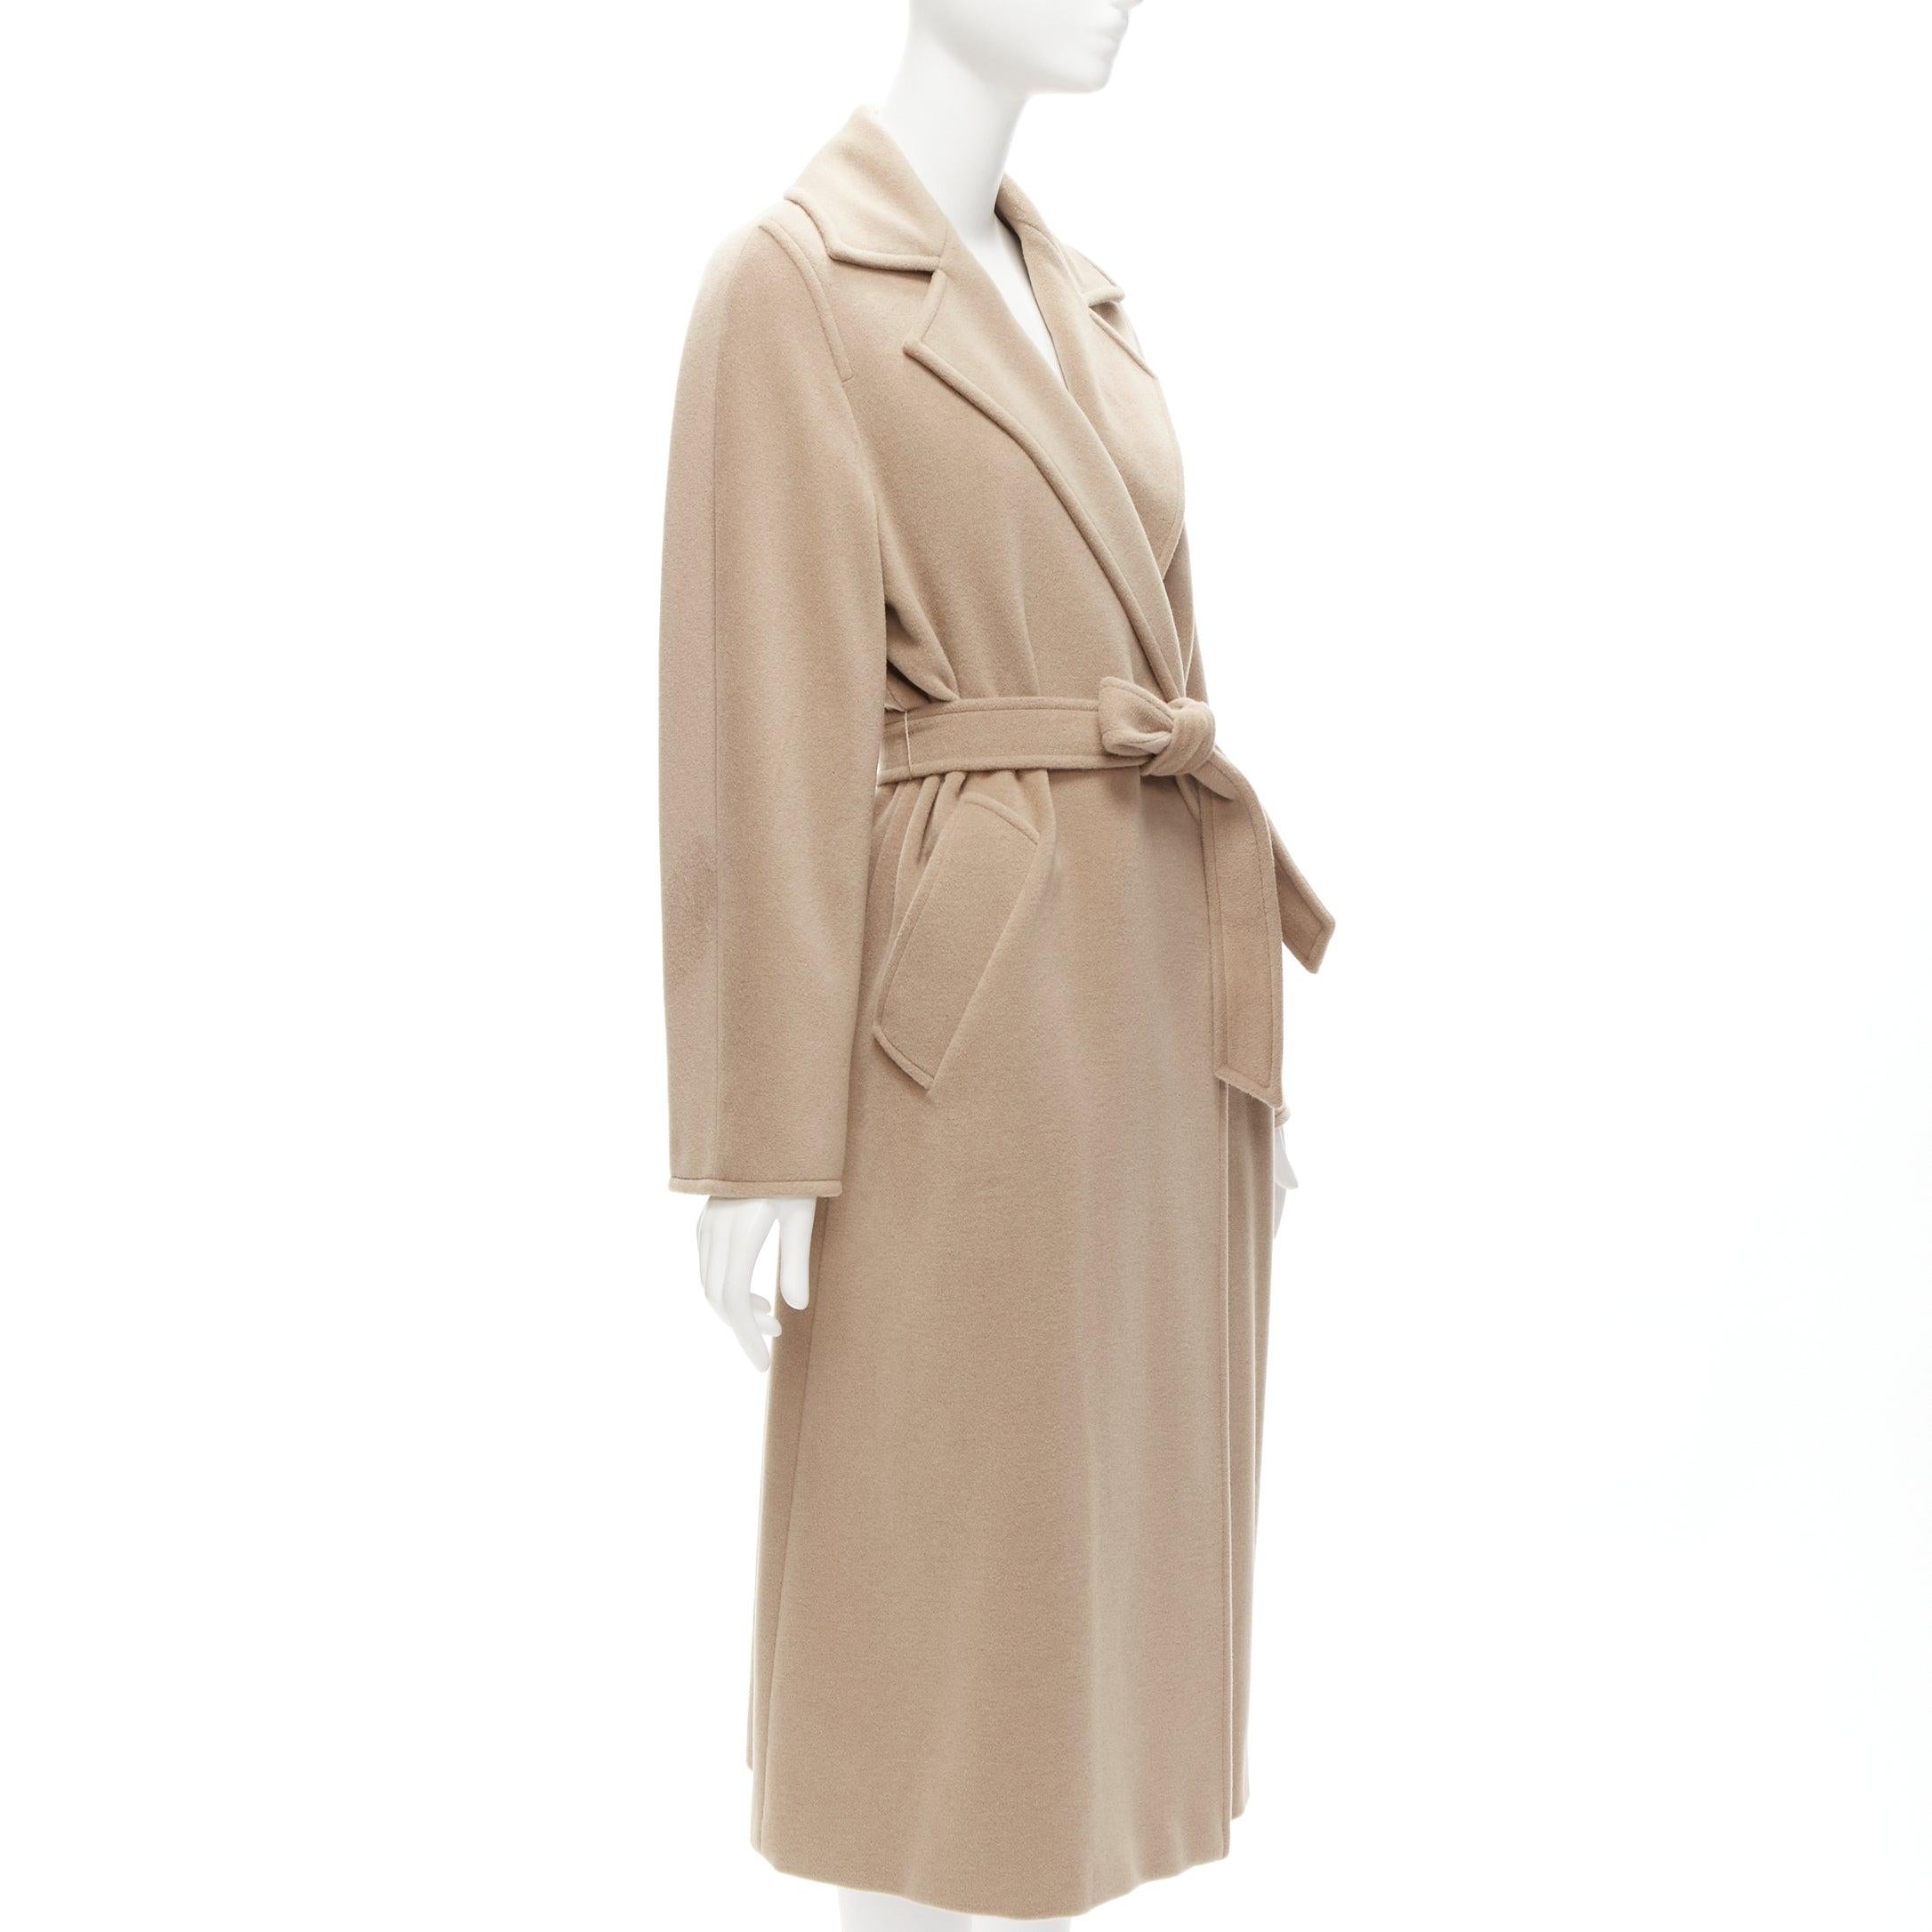 MAX MARA beige virgin wool Angora tie belt long overcoat IT38 XS
Reference: TGAS/D00968
Brand: Max Mara
Material: Virgin Wool, Angora
Color: Beige
Pattern: Solid
Closure: Belt
Lining: Gold Fabric
Extra Details: Double breasted with belt. Single vent